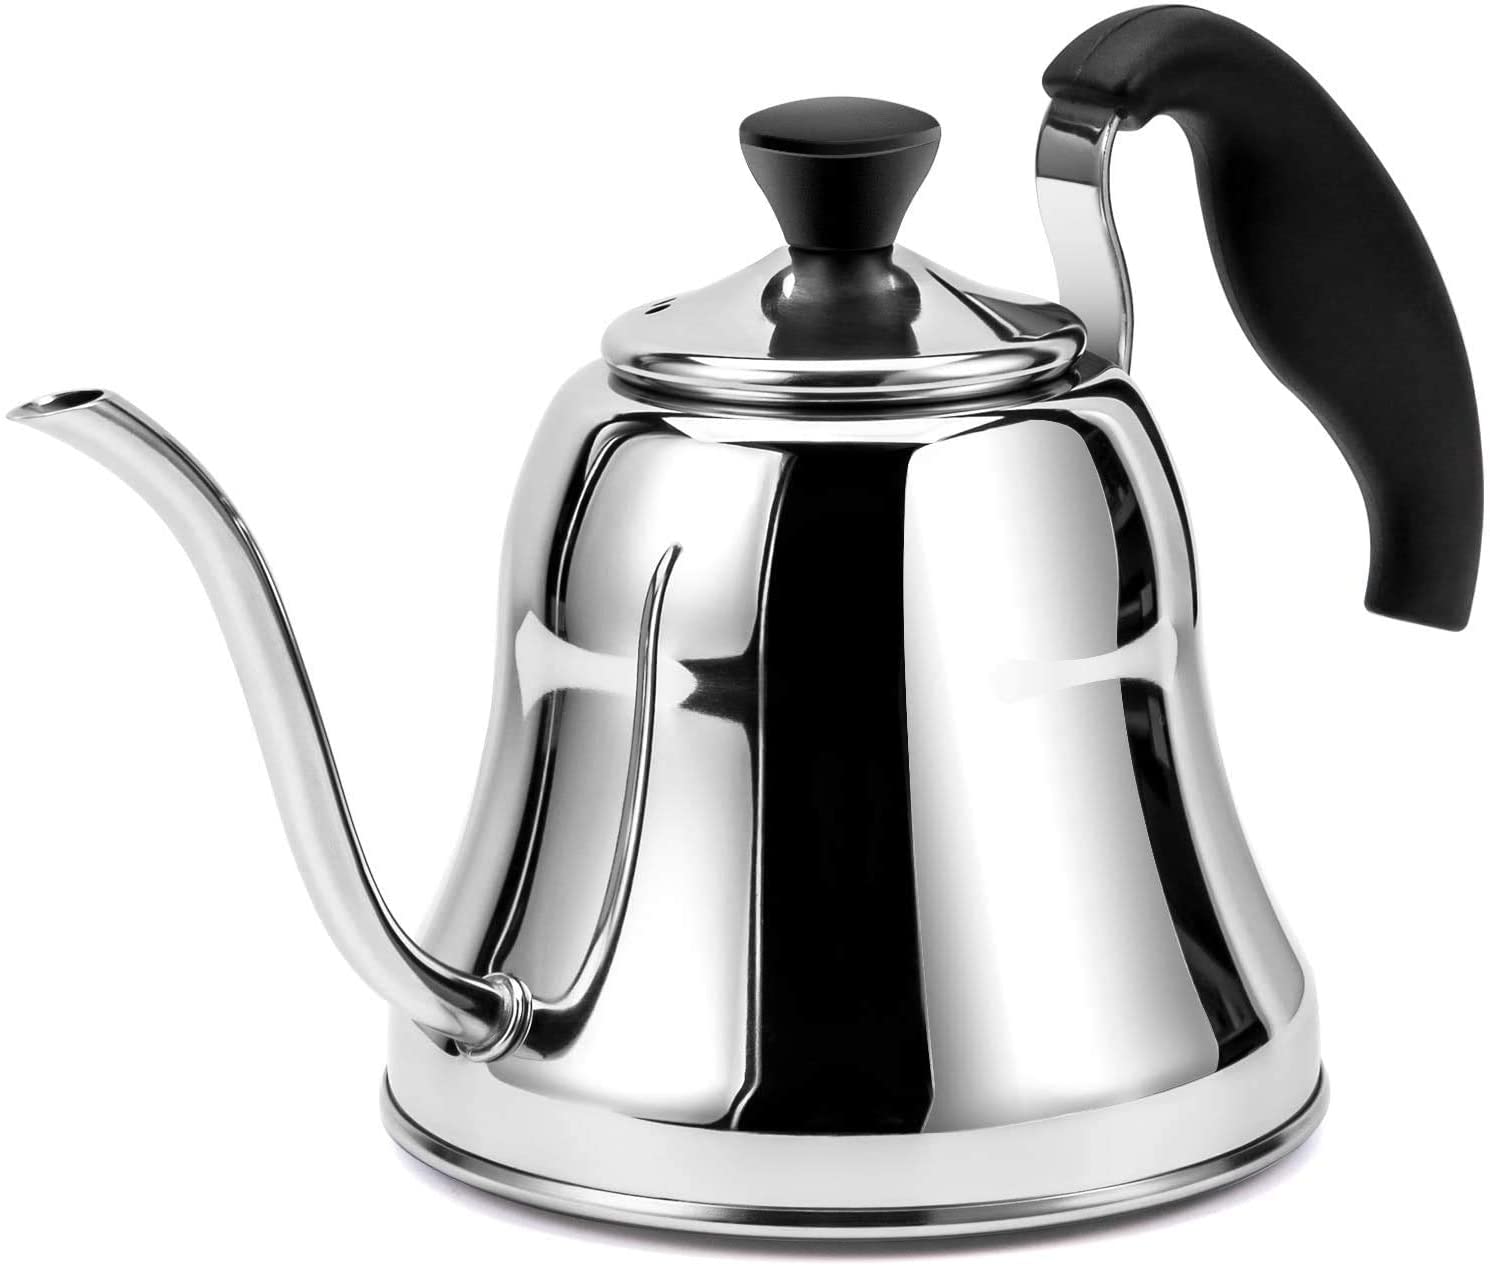 Chefbar Tea Kettle Gooseneck Coffee Kettle Pour Over Coffee Kettle, Stovetop for